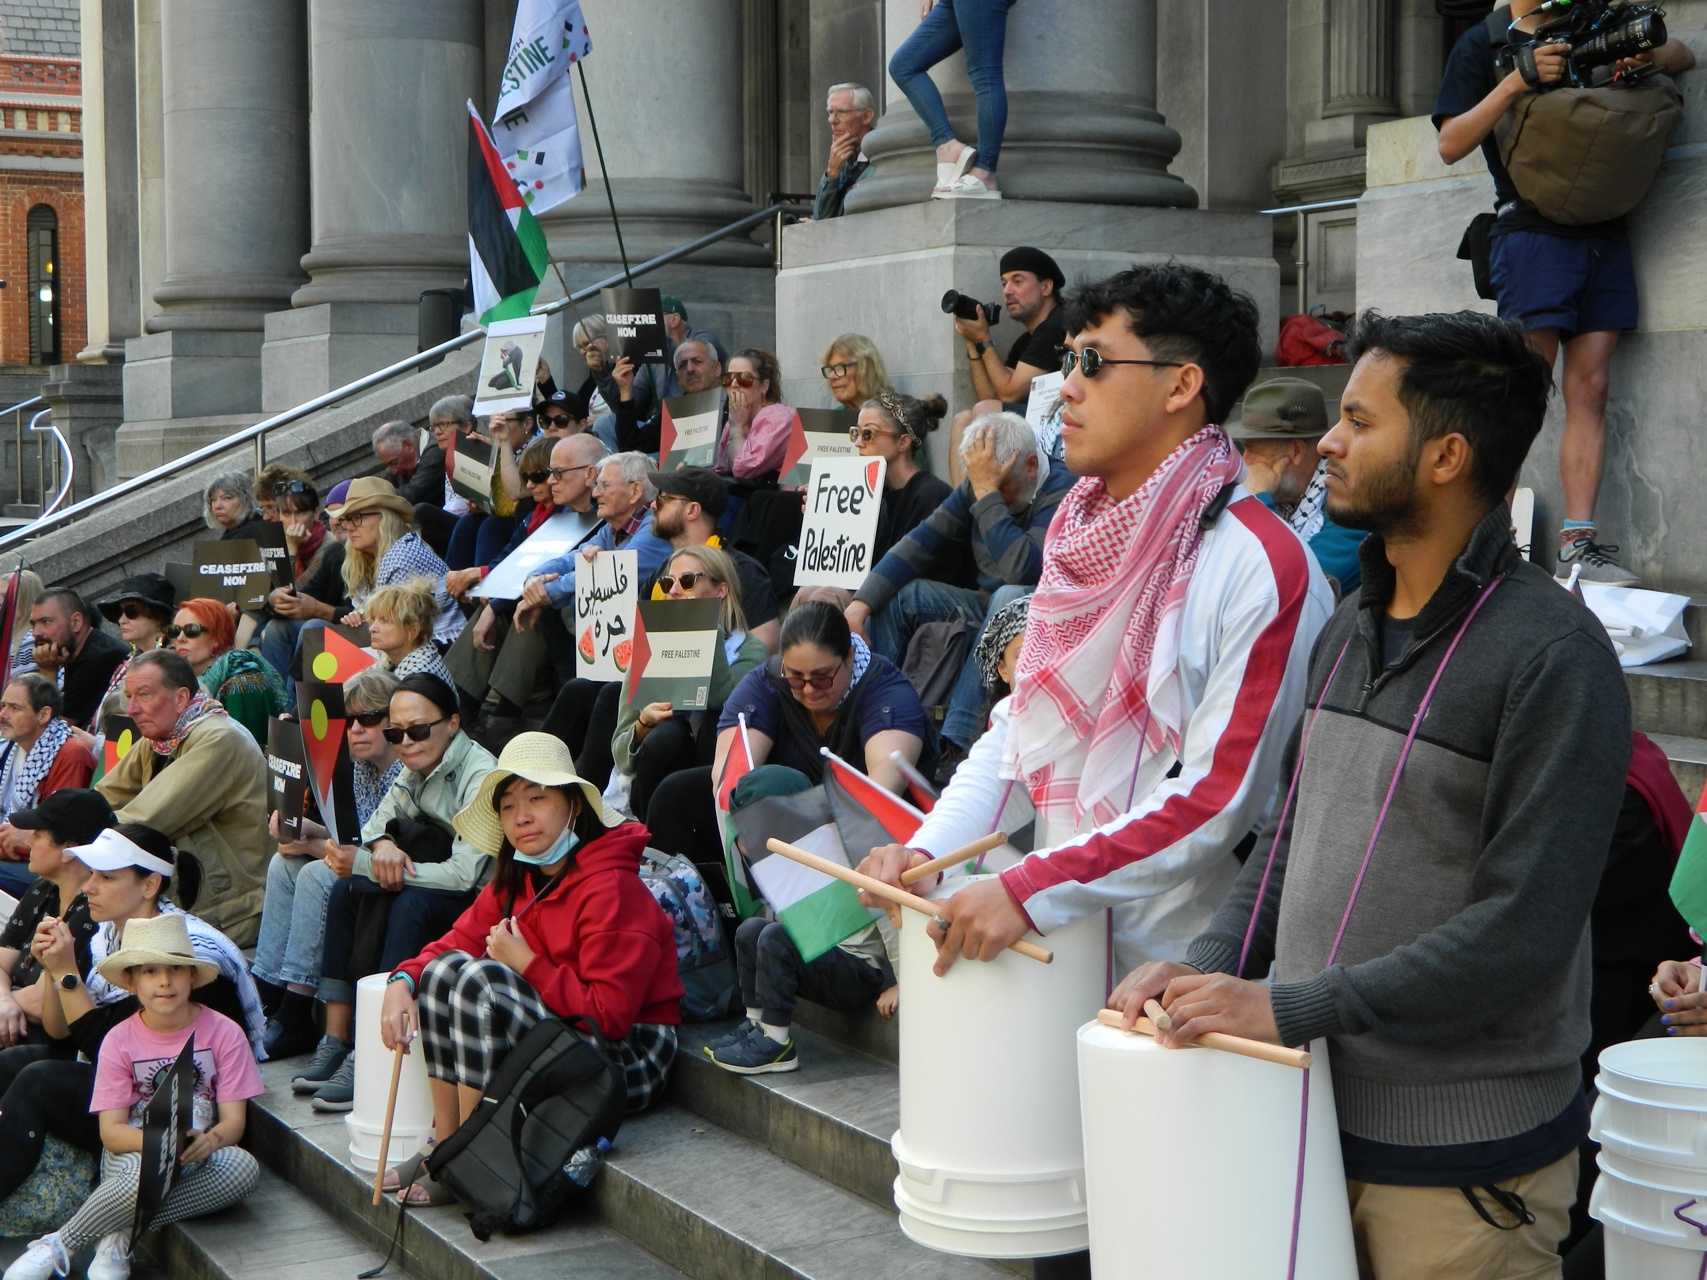 More from the Kaurna Yerta/Adelaide rally, April 7